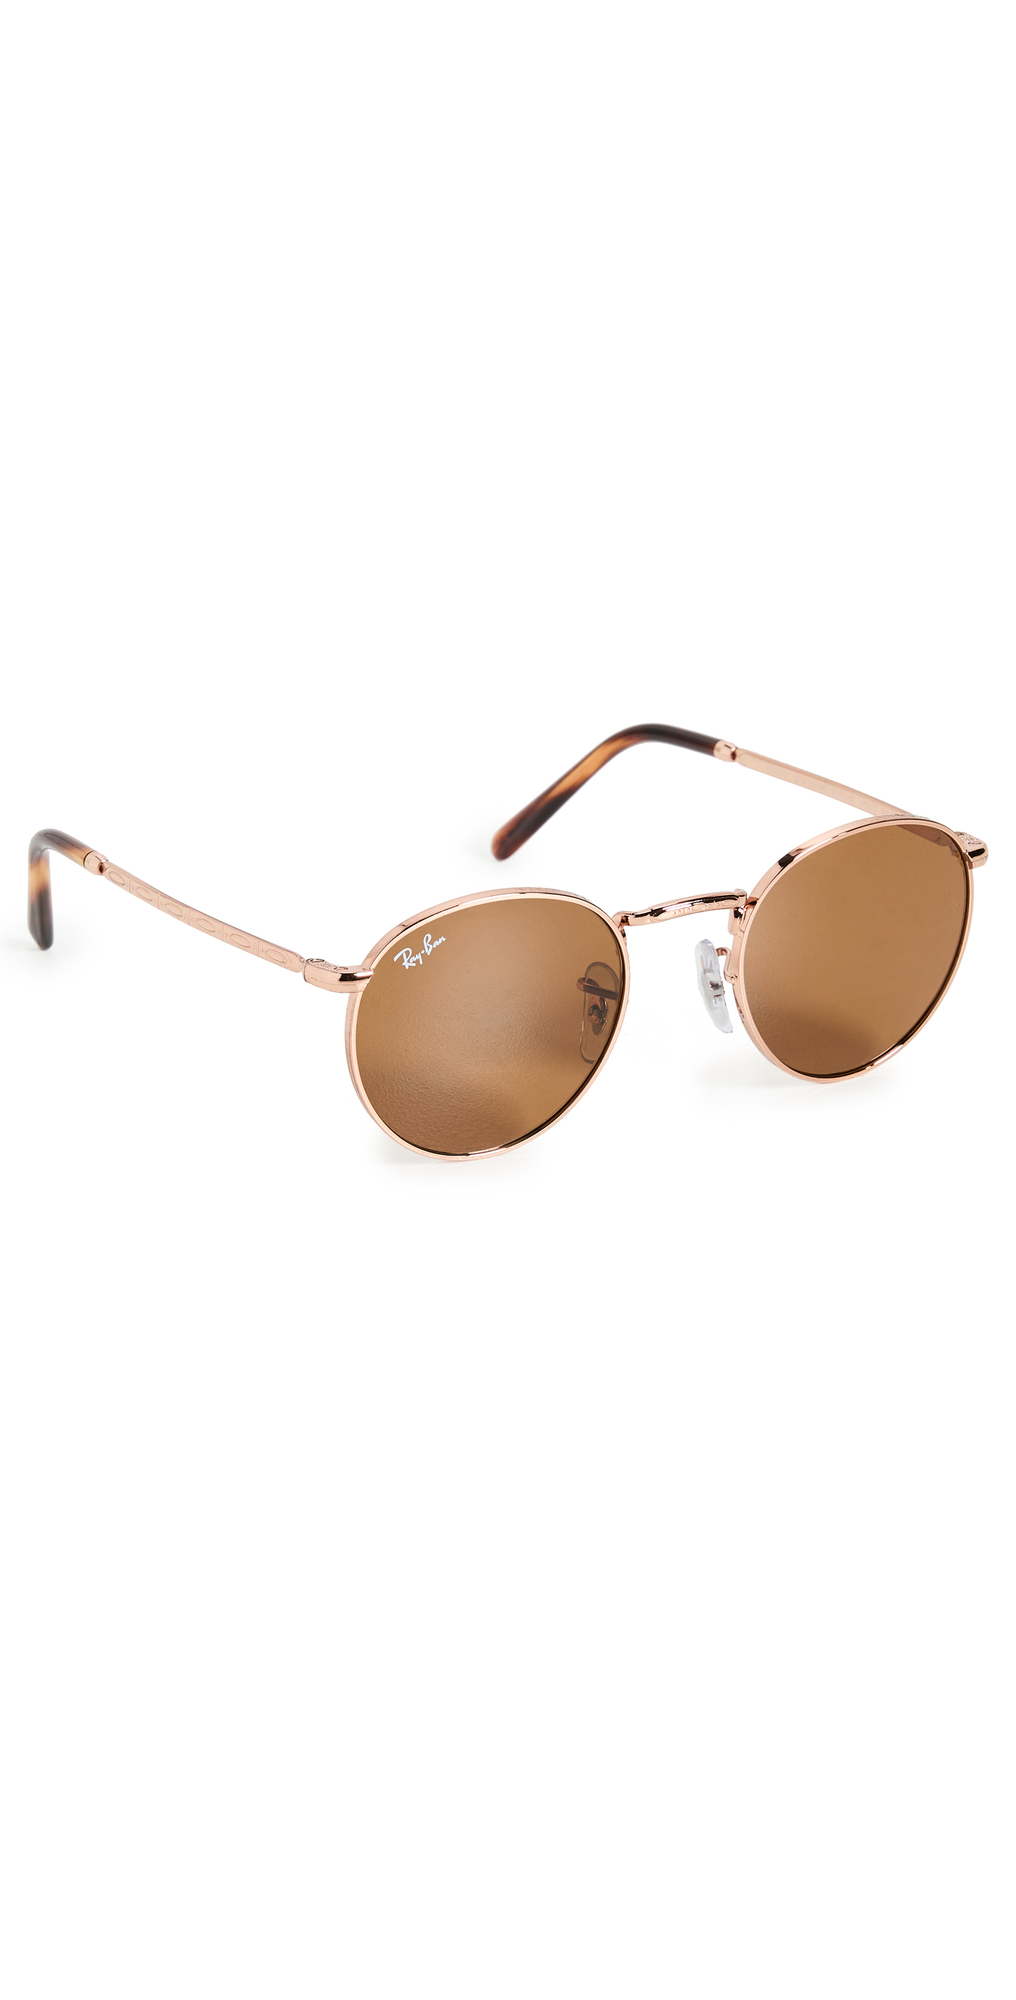 Ray-Ban Evolution Phantos Sunglasses in brown / gold / rose